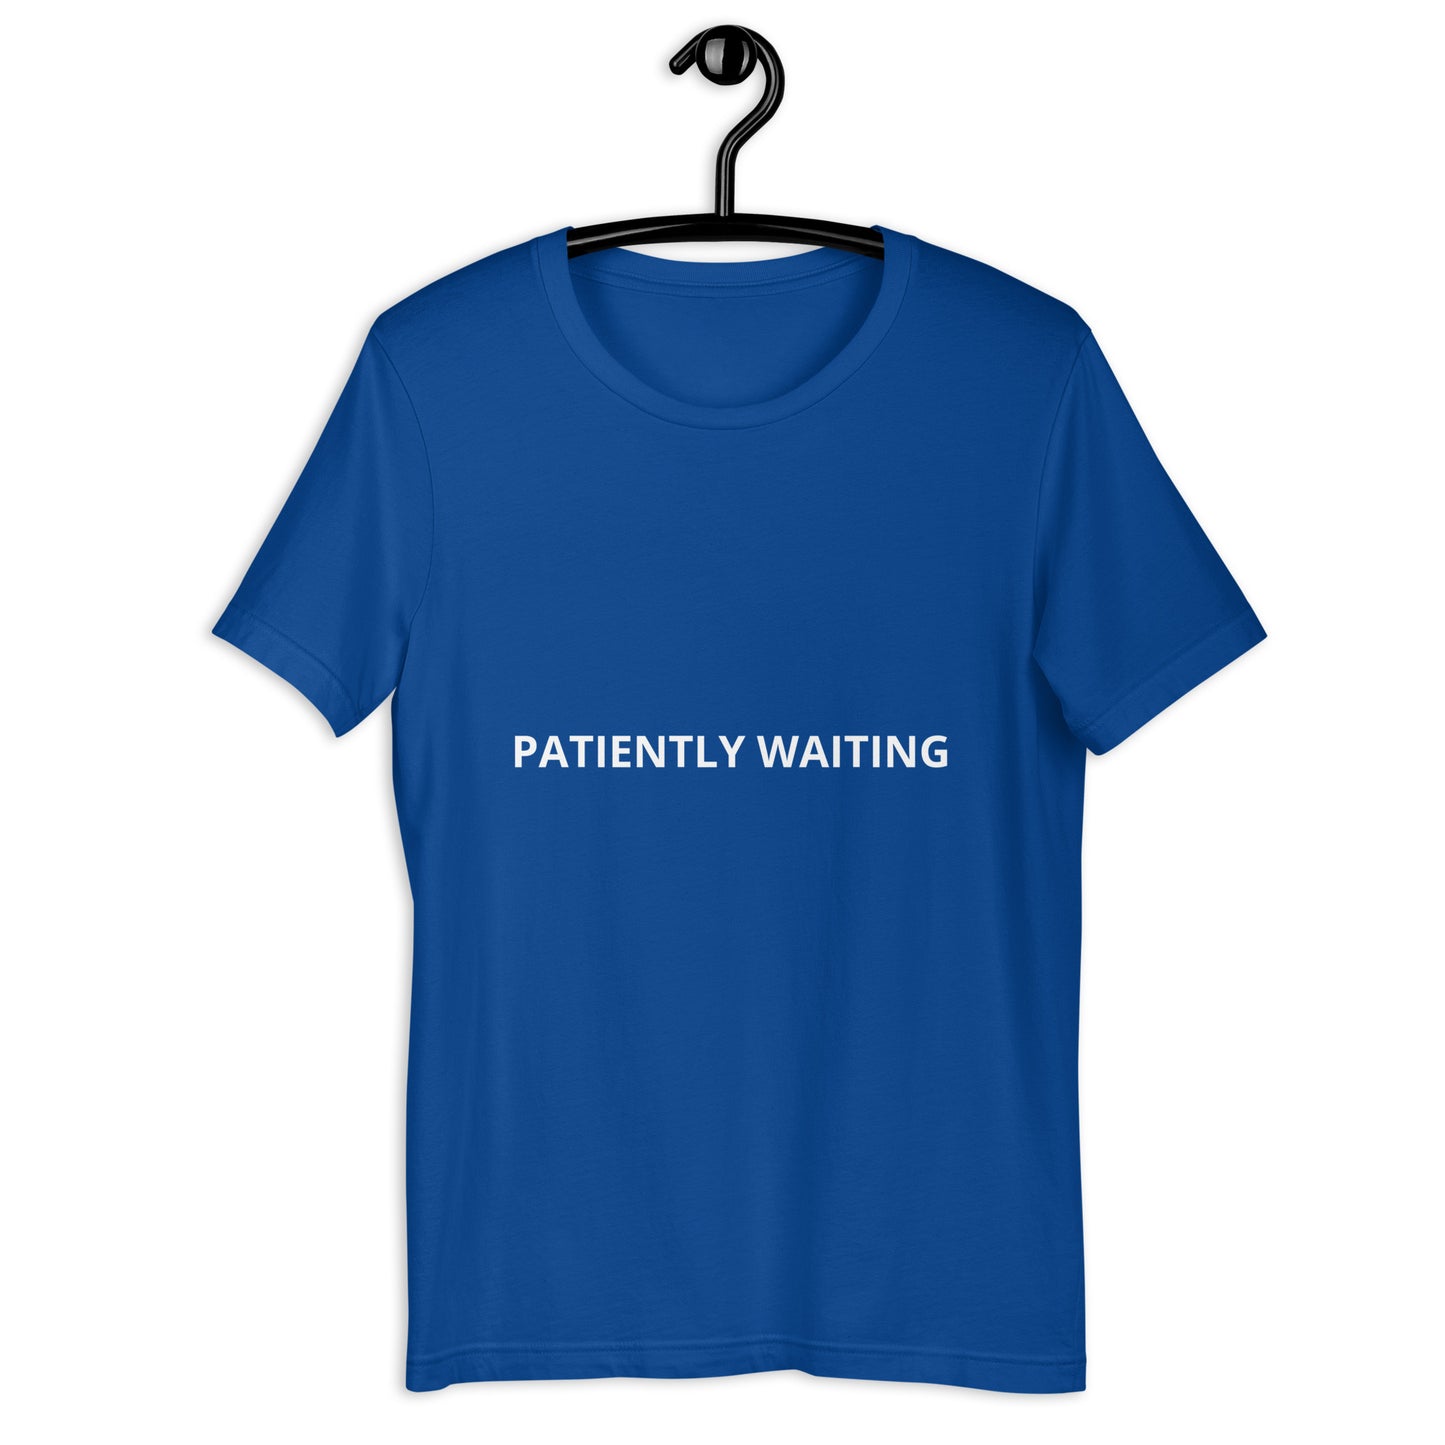 PATIENTLY WAITING Unisex t-shirt